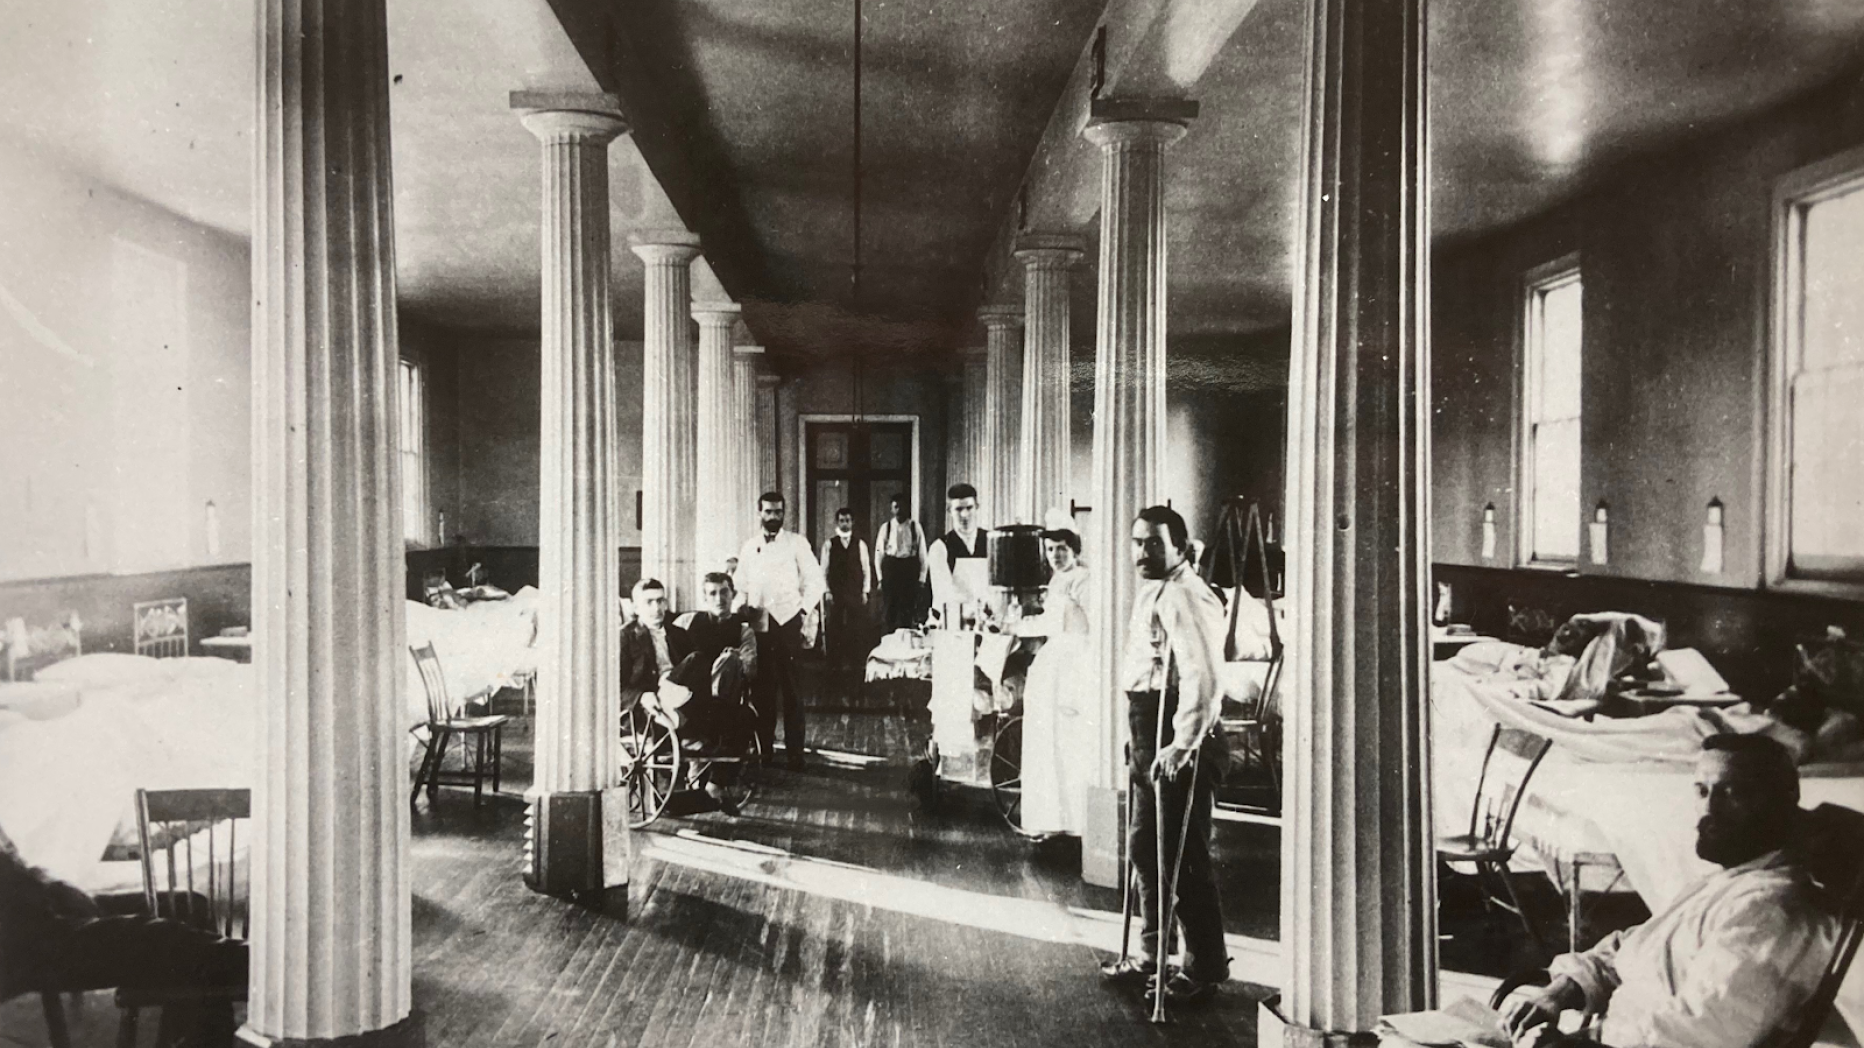 Old black and white interior photo of hospital patients in a grand looking door lined with columns down the center.